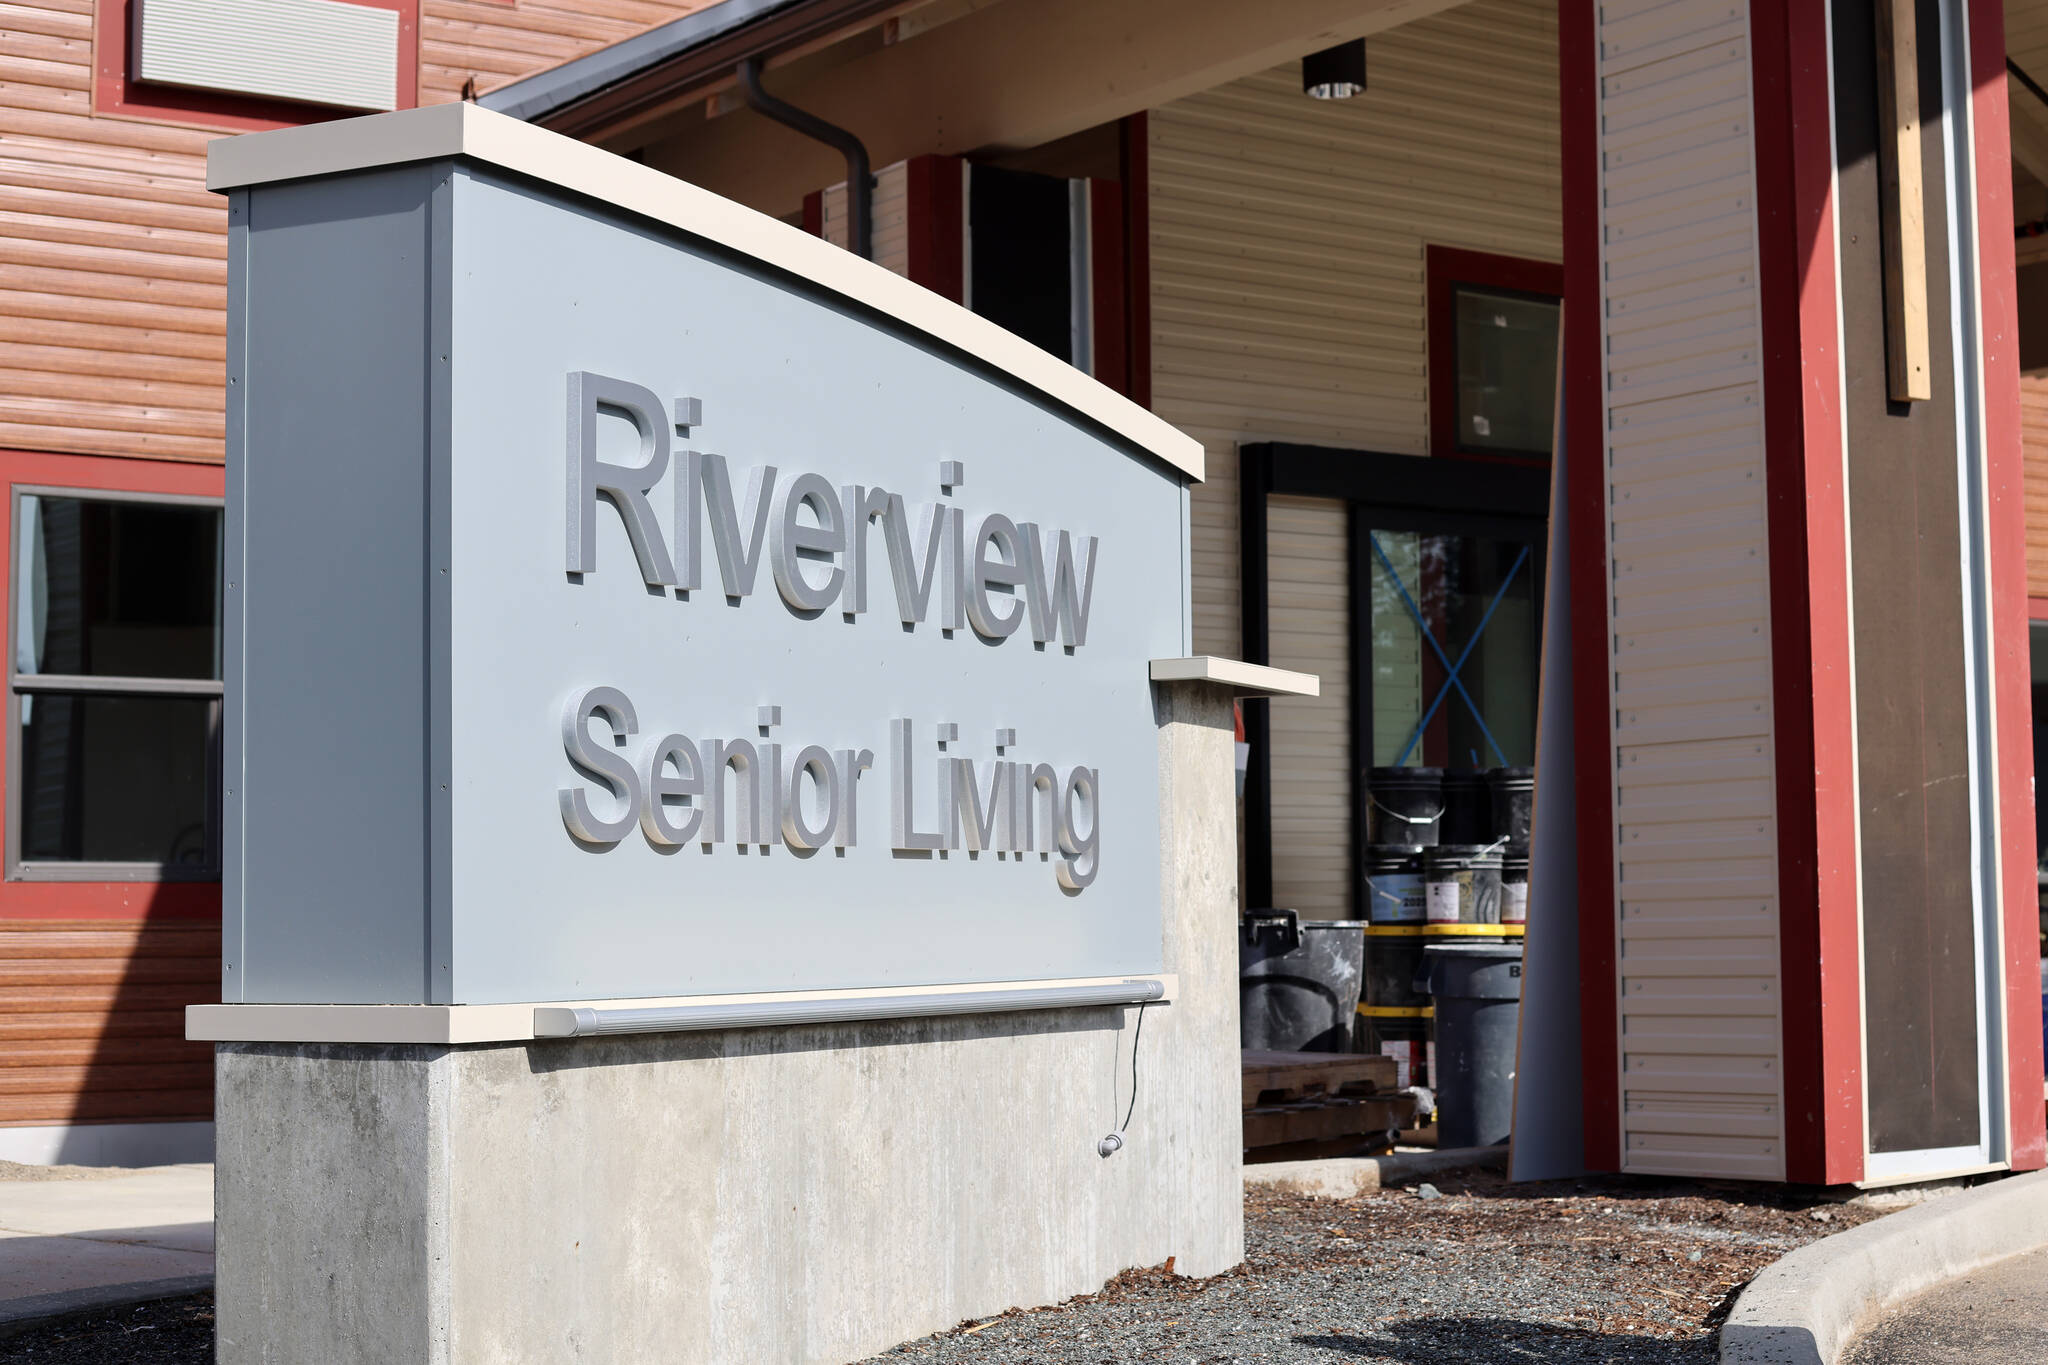 Sun shines on a sign outside of Riverview Senior Living, an assisted-living community expected to welcome move-ins in early May. Ahead of that, a public event featuring Riverview’s team of directors will be held Saturday at the Baranof Hotel. (Ben Hohenstatt / Juneau Empire)